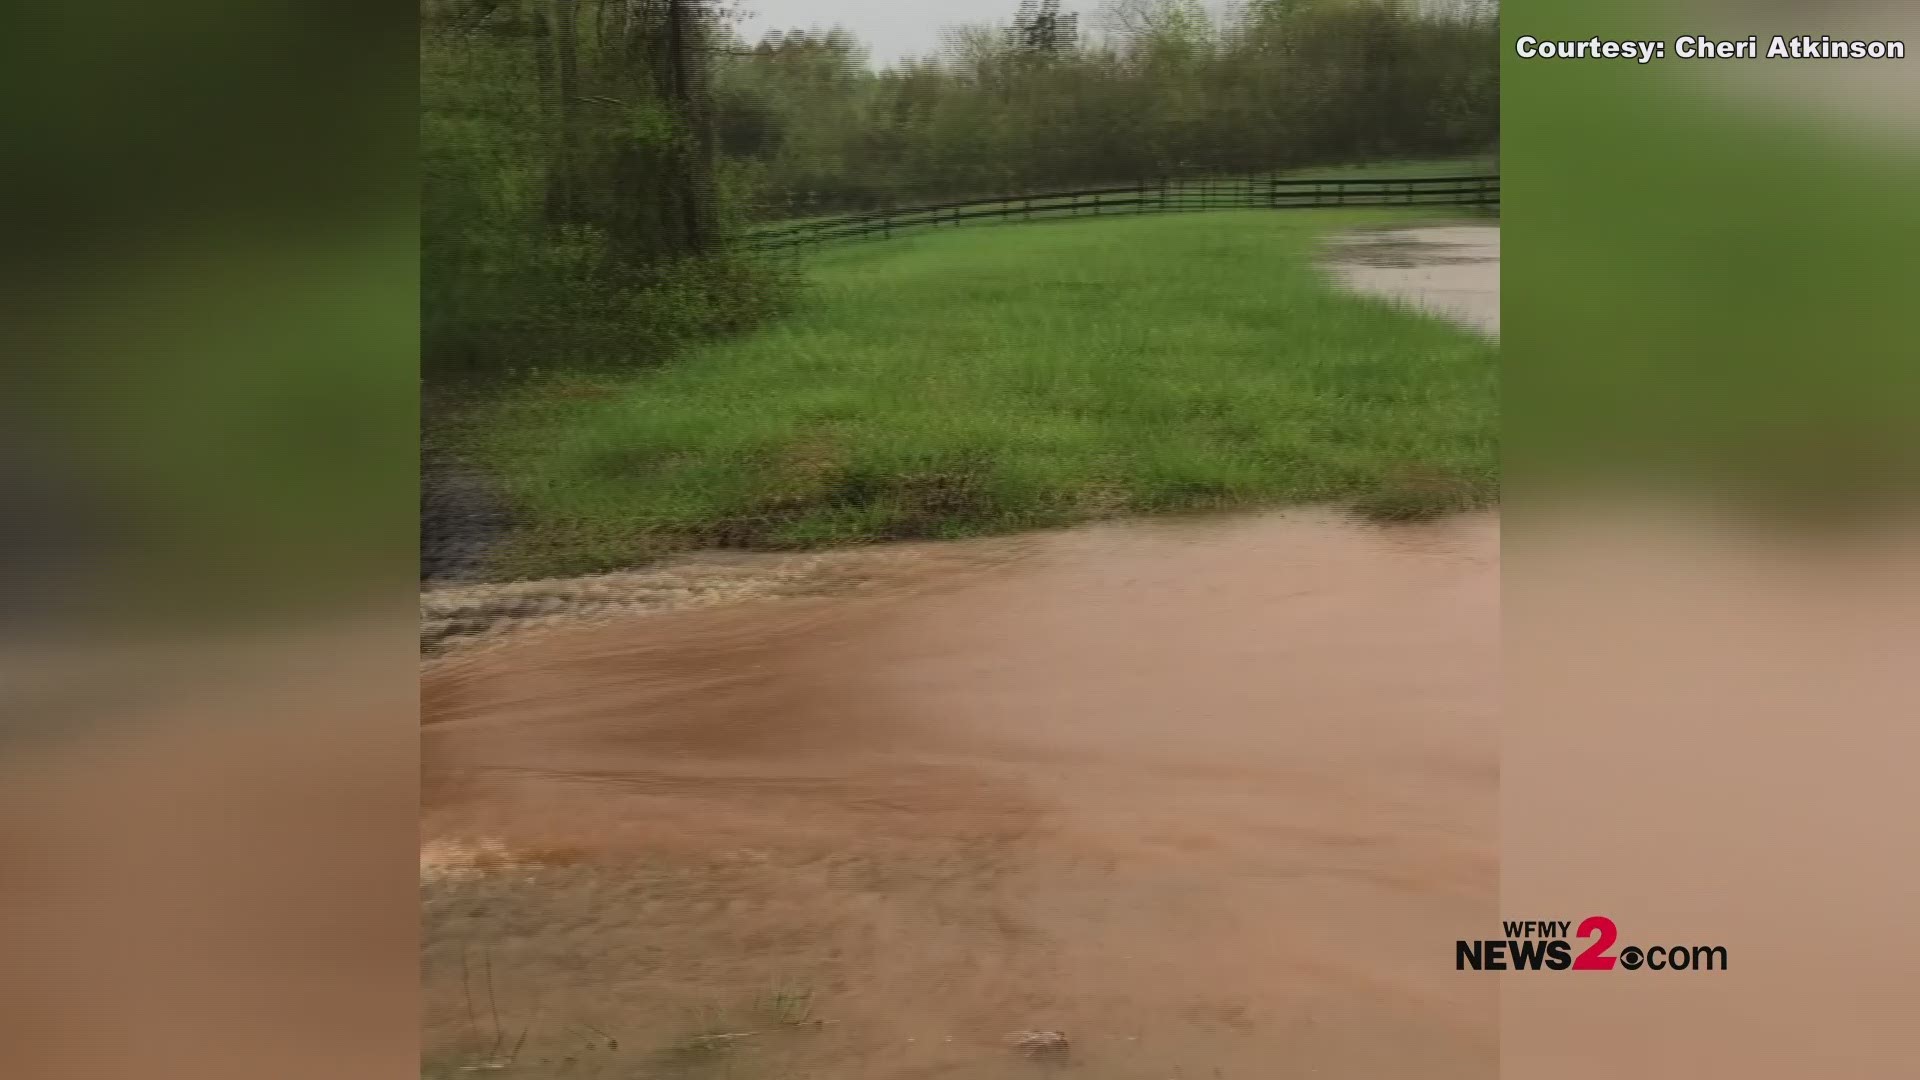 Rain brought flooding to parts of Pleasant Garden on Saturday.